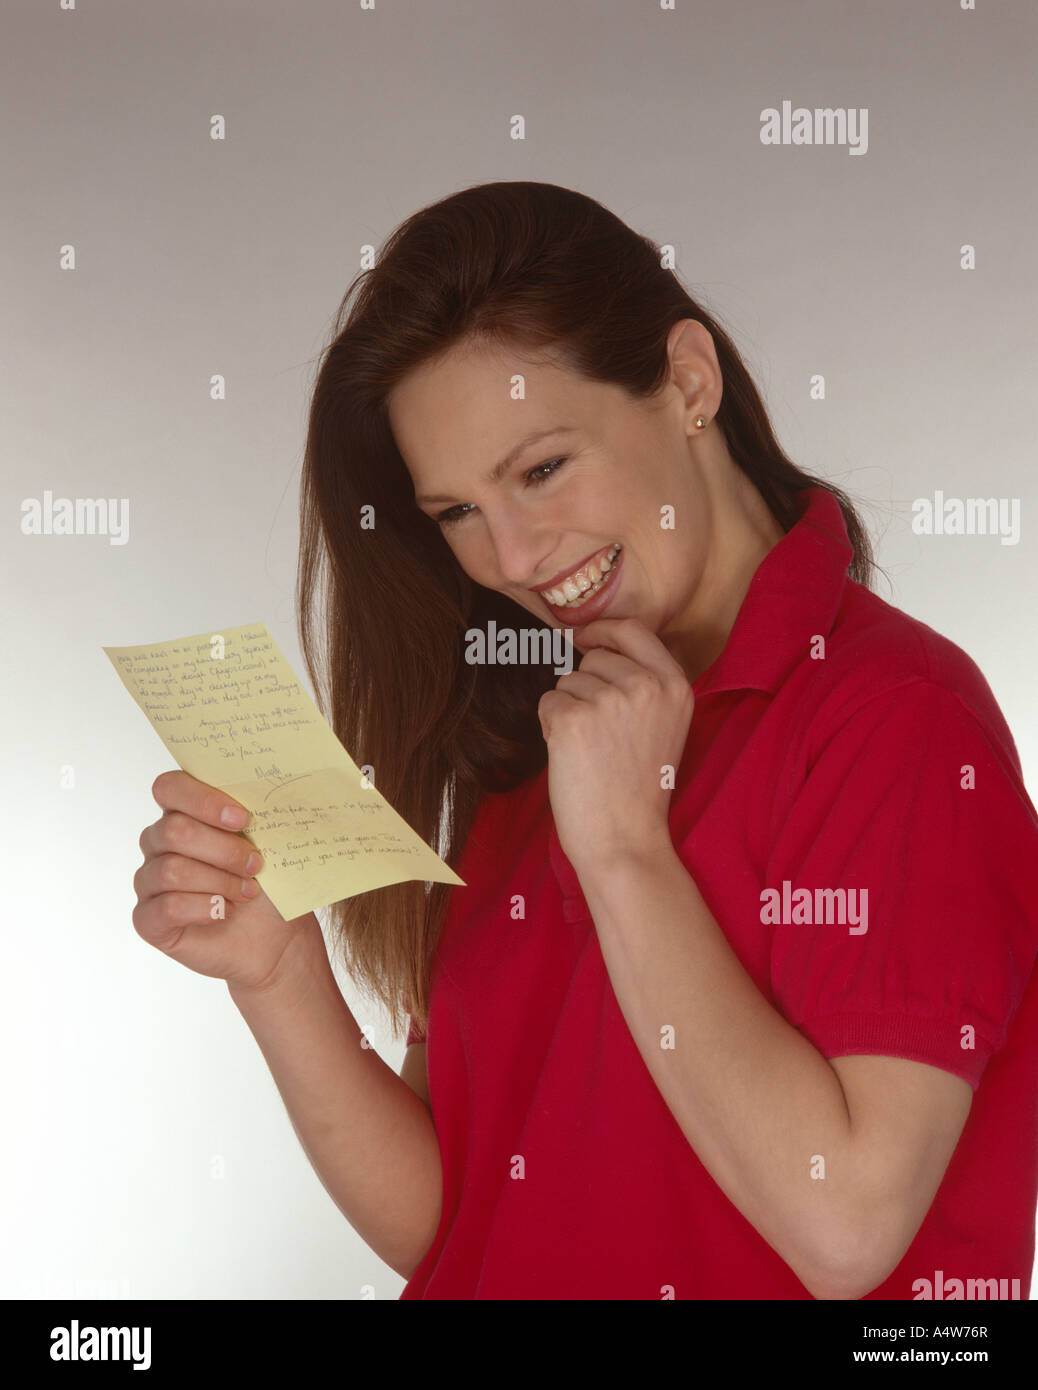 GIRL IN RED TOP READING LETTER Stock Photo